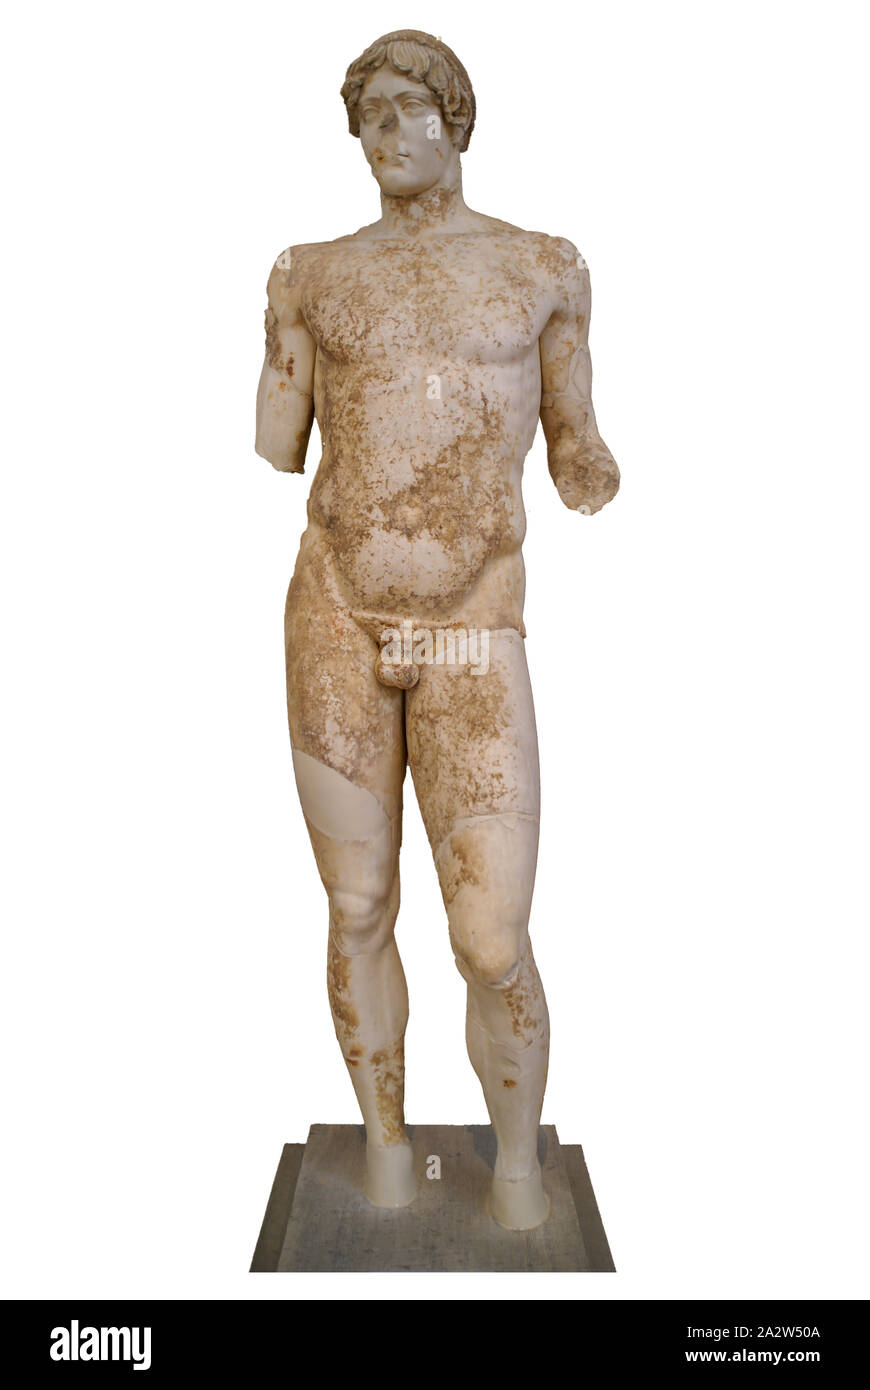 National Archaeological Museum - Athens, Greece.  Statue of a man. Stock Photo